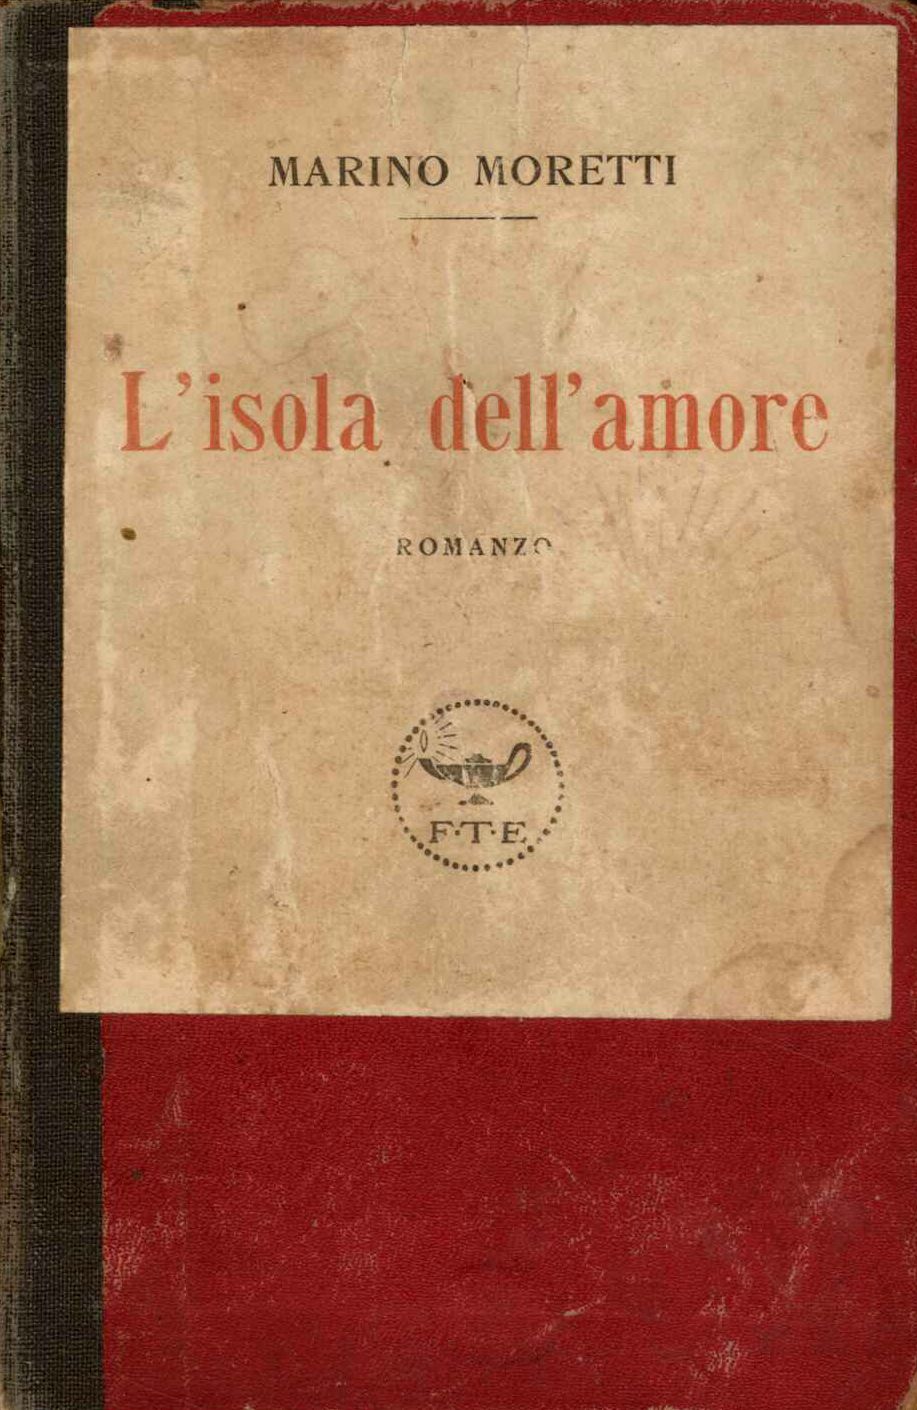 L'isola dell'amore